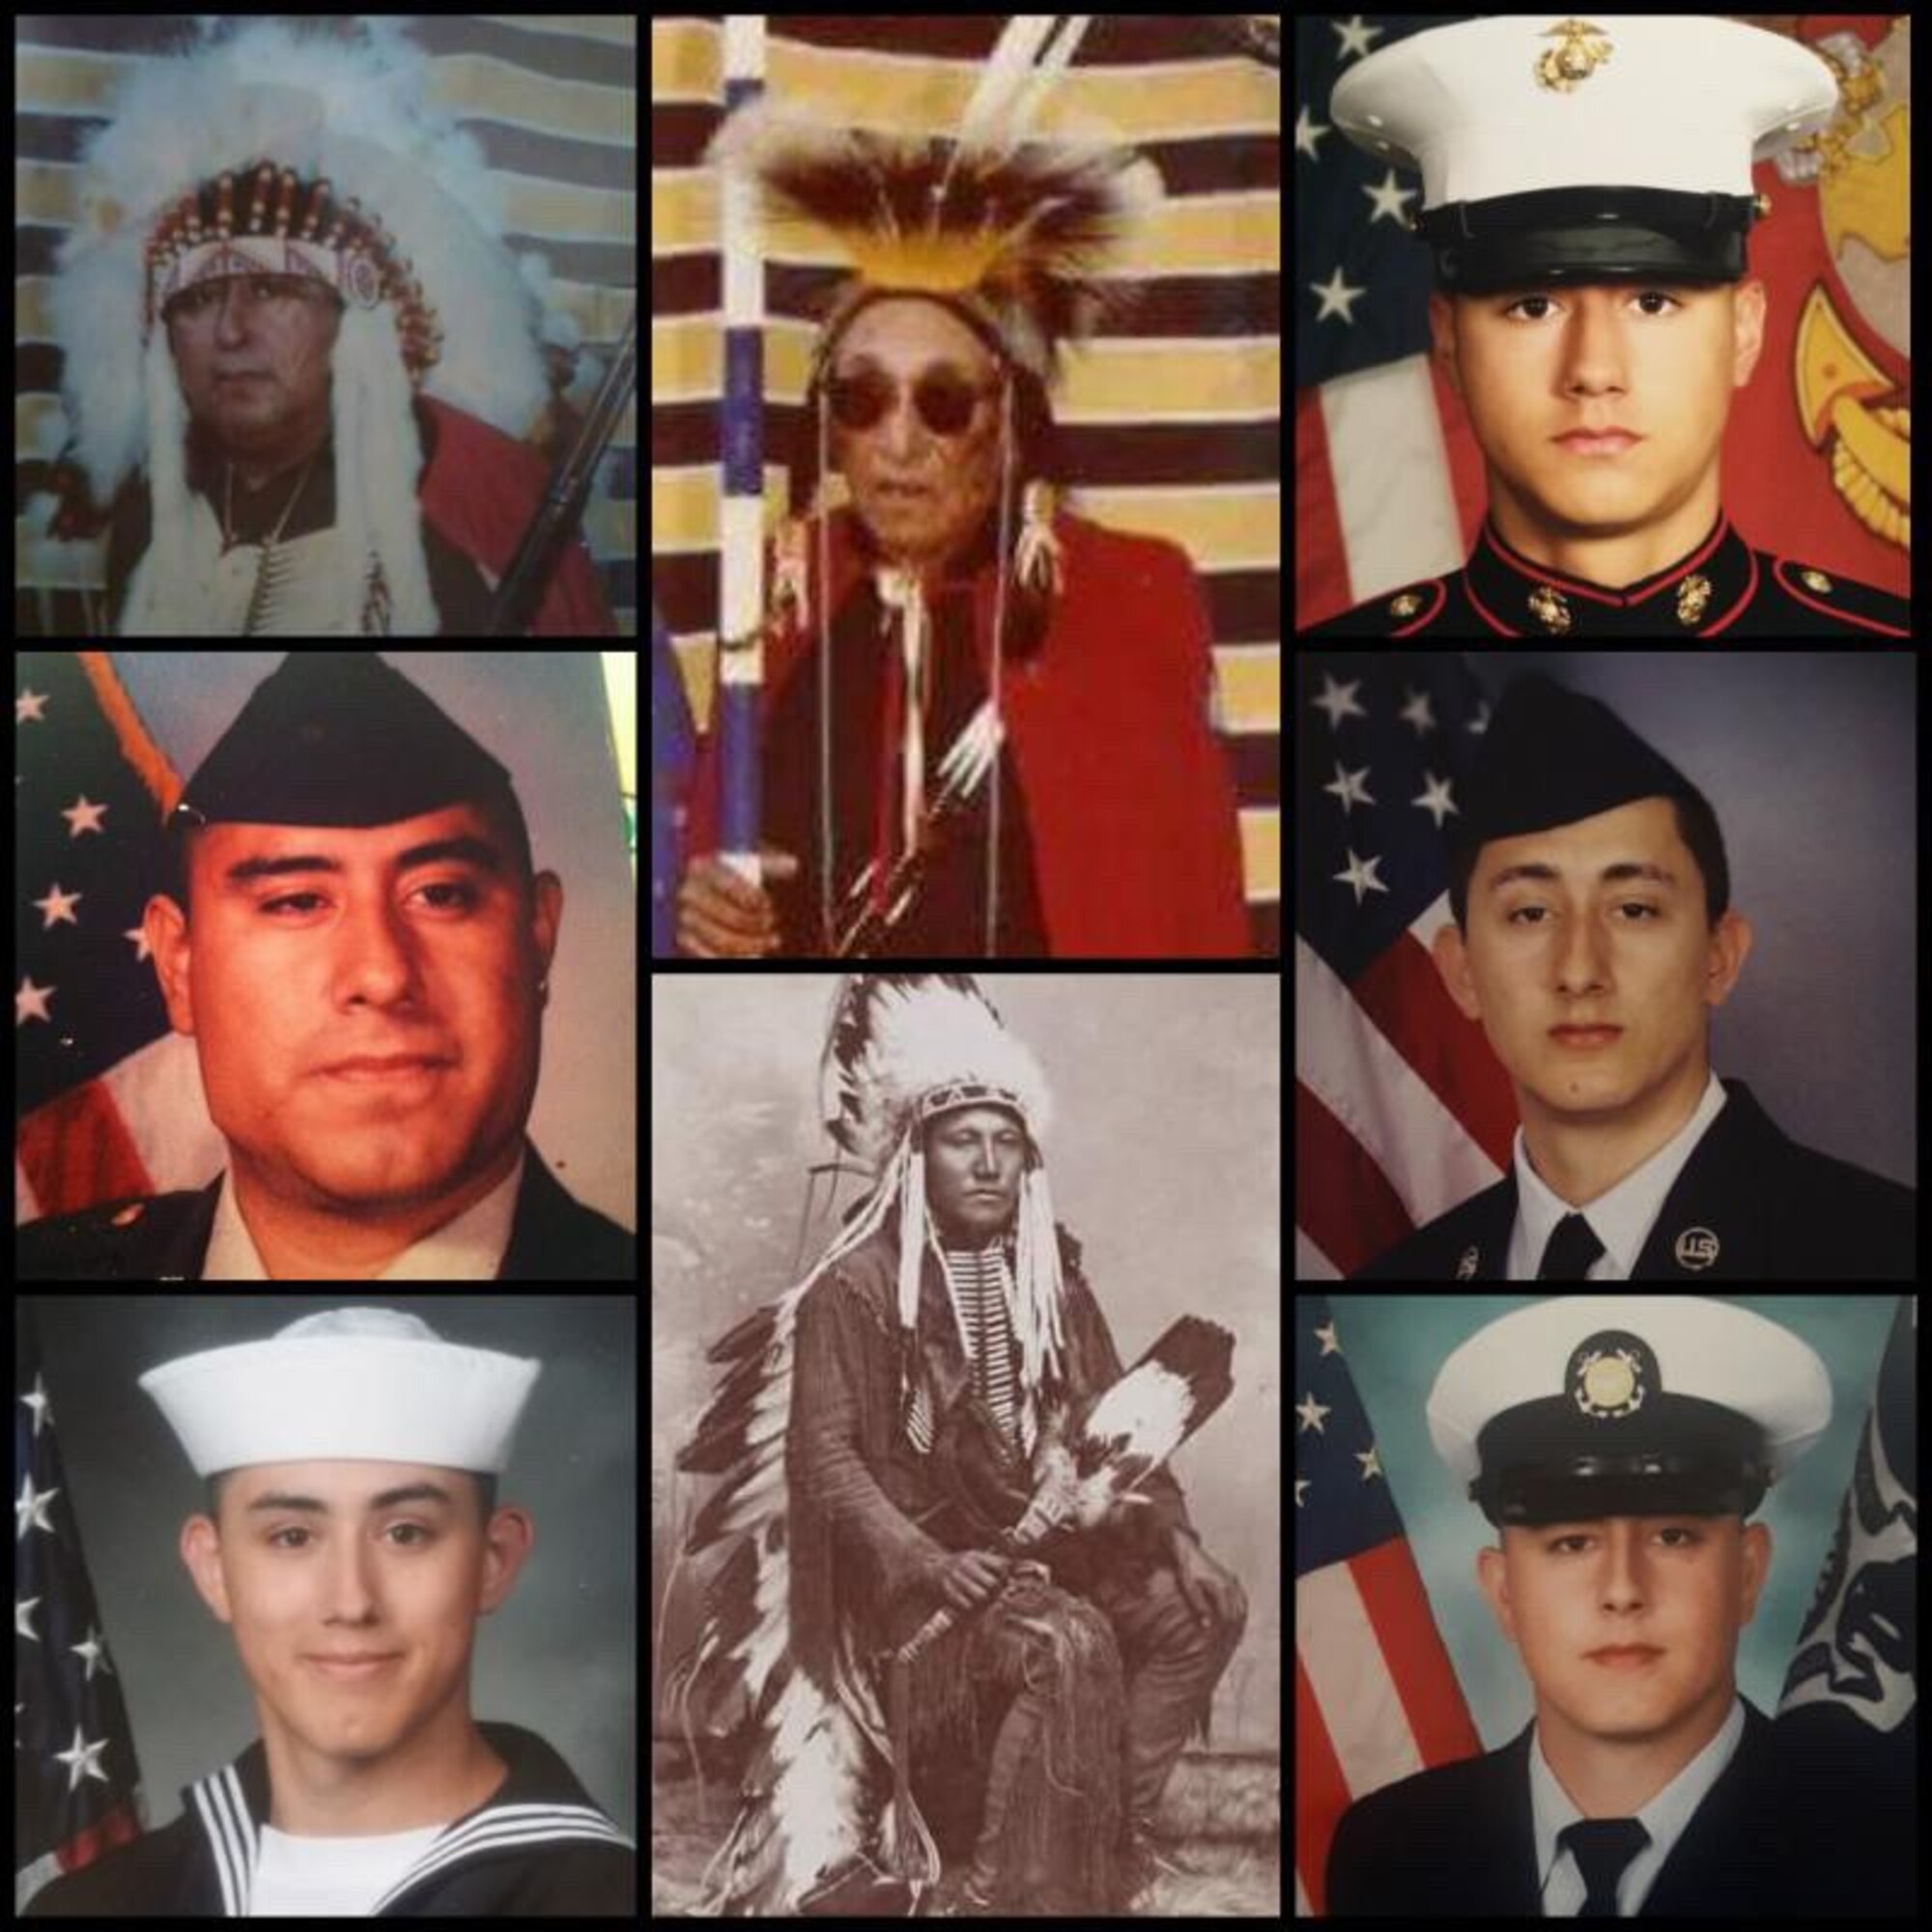 A collage of six people in military uniform and two Indian chiefs.